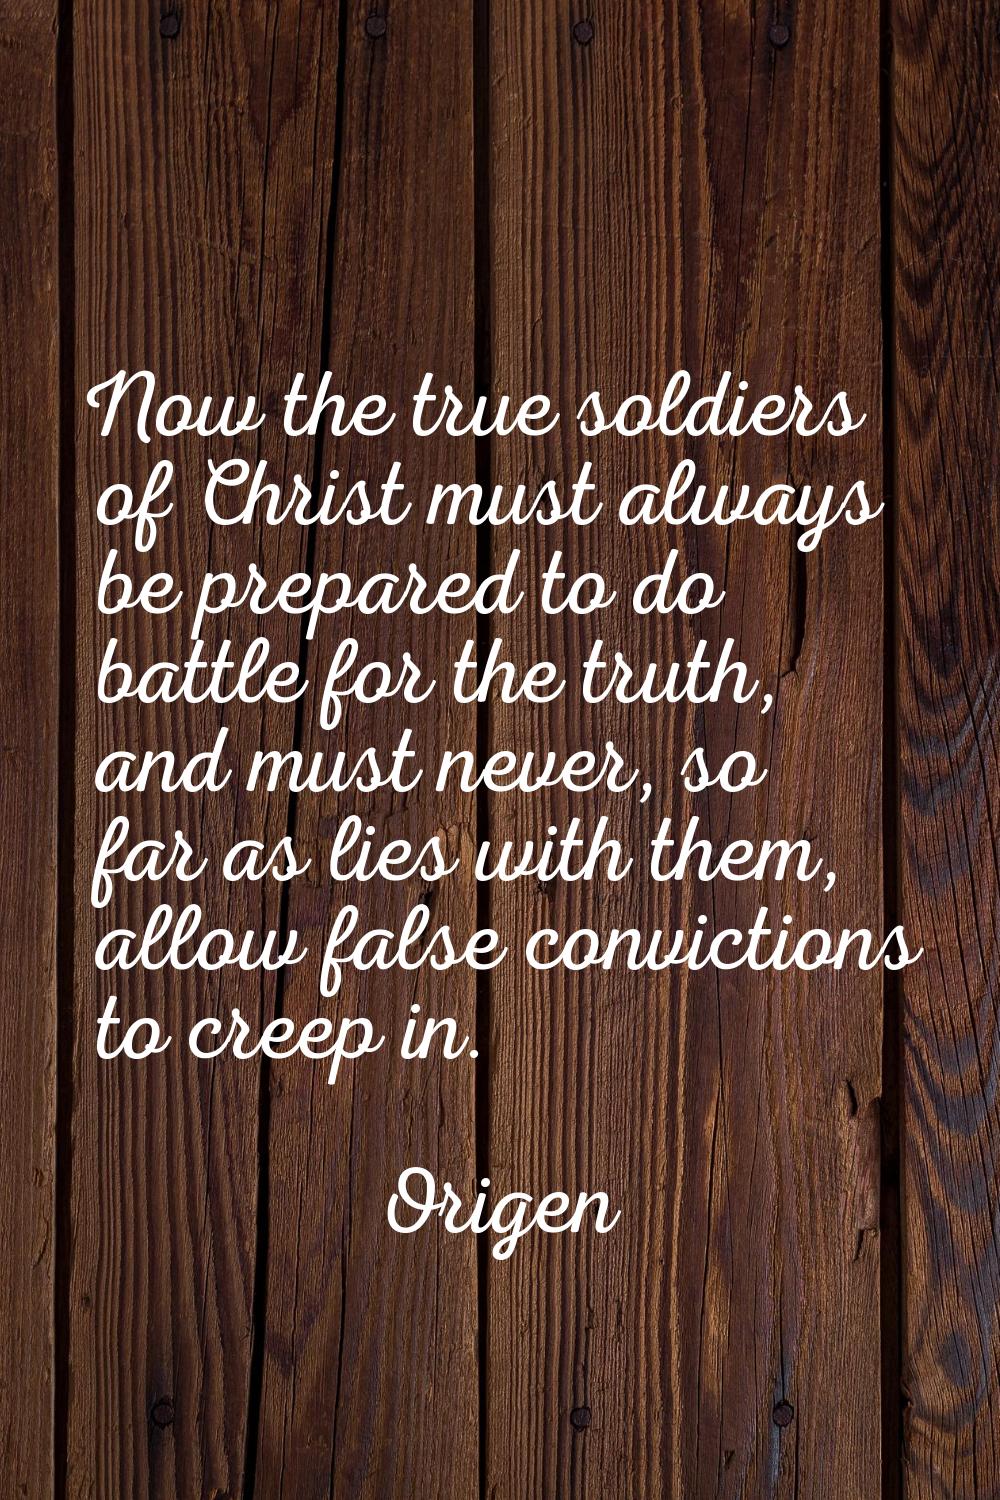 Now the true soldiers of Christ must always be prepared to do battle for the truth, and must never,